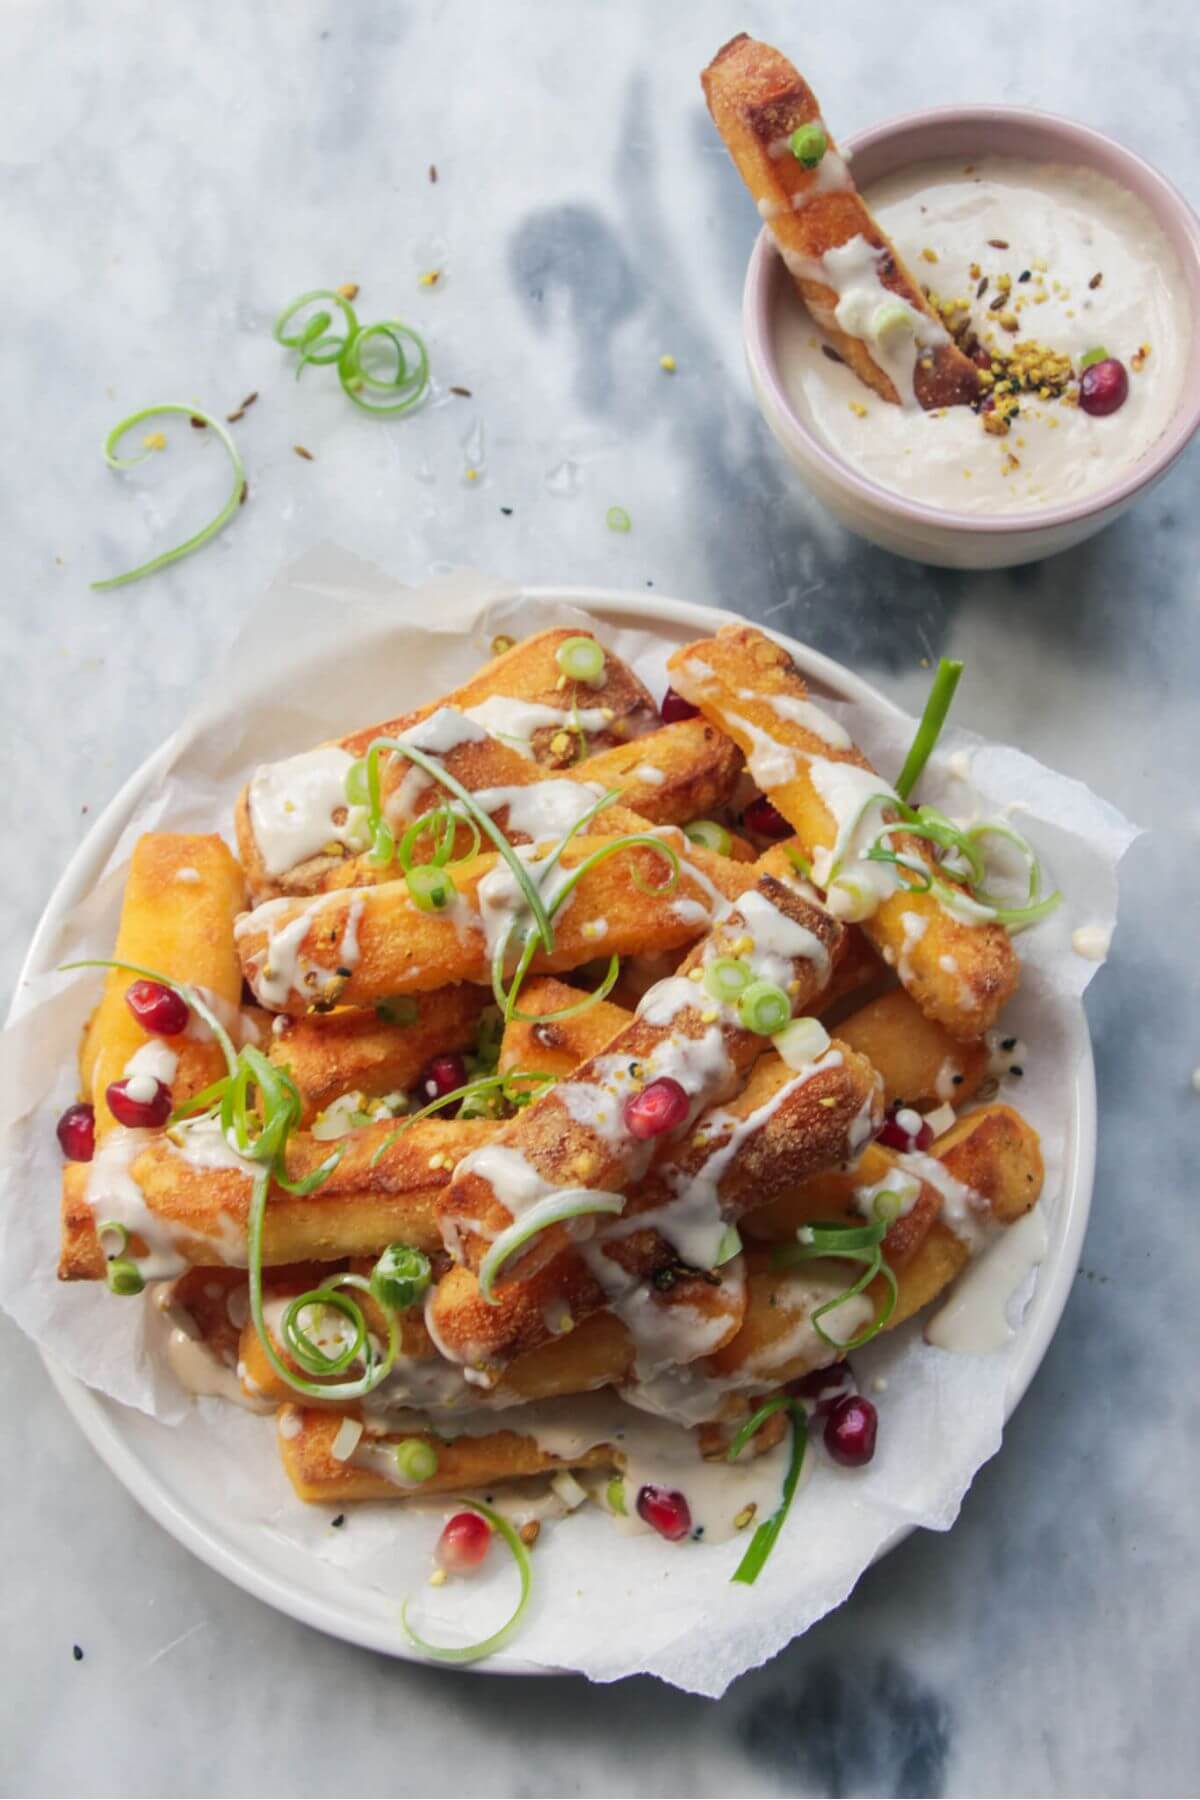 Pile of halloumi fries on a white plate with pomegranate seeds, spring onion and tahini sauce drizzled on top.